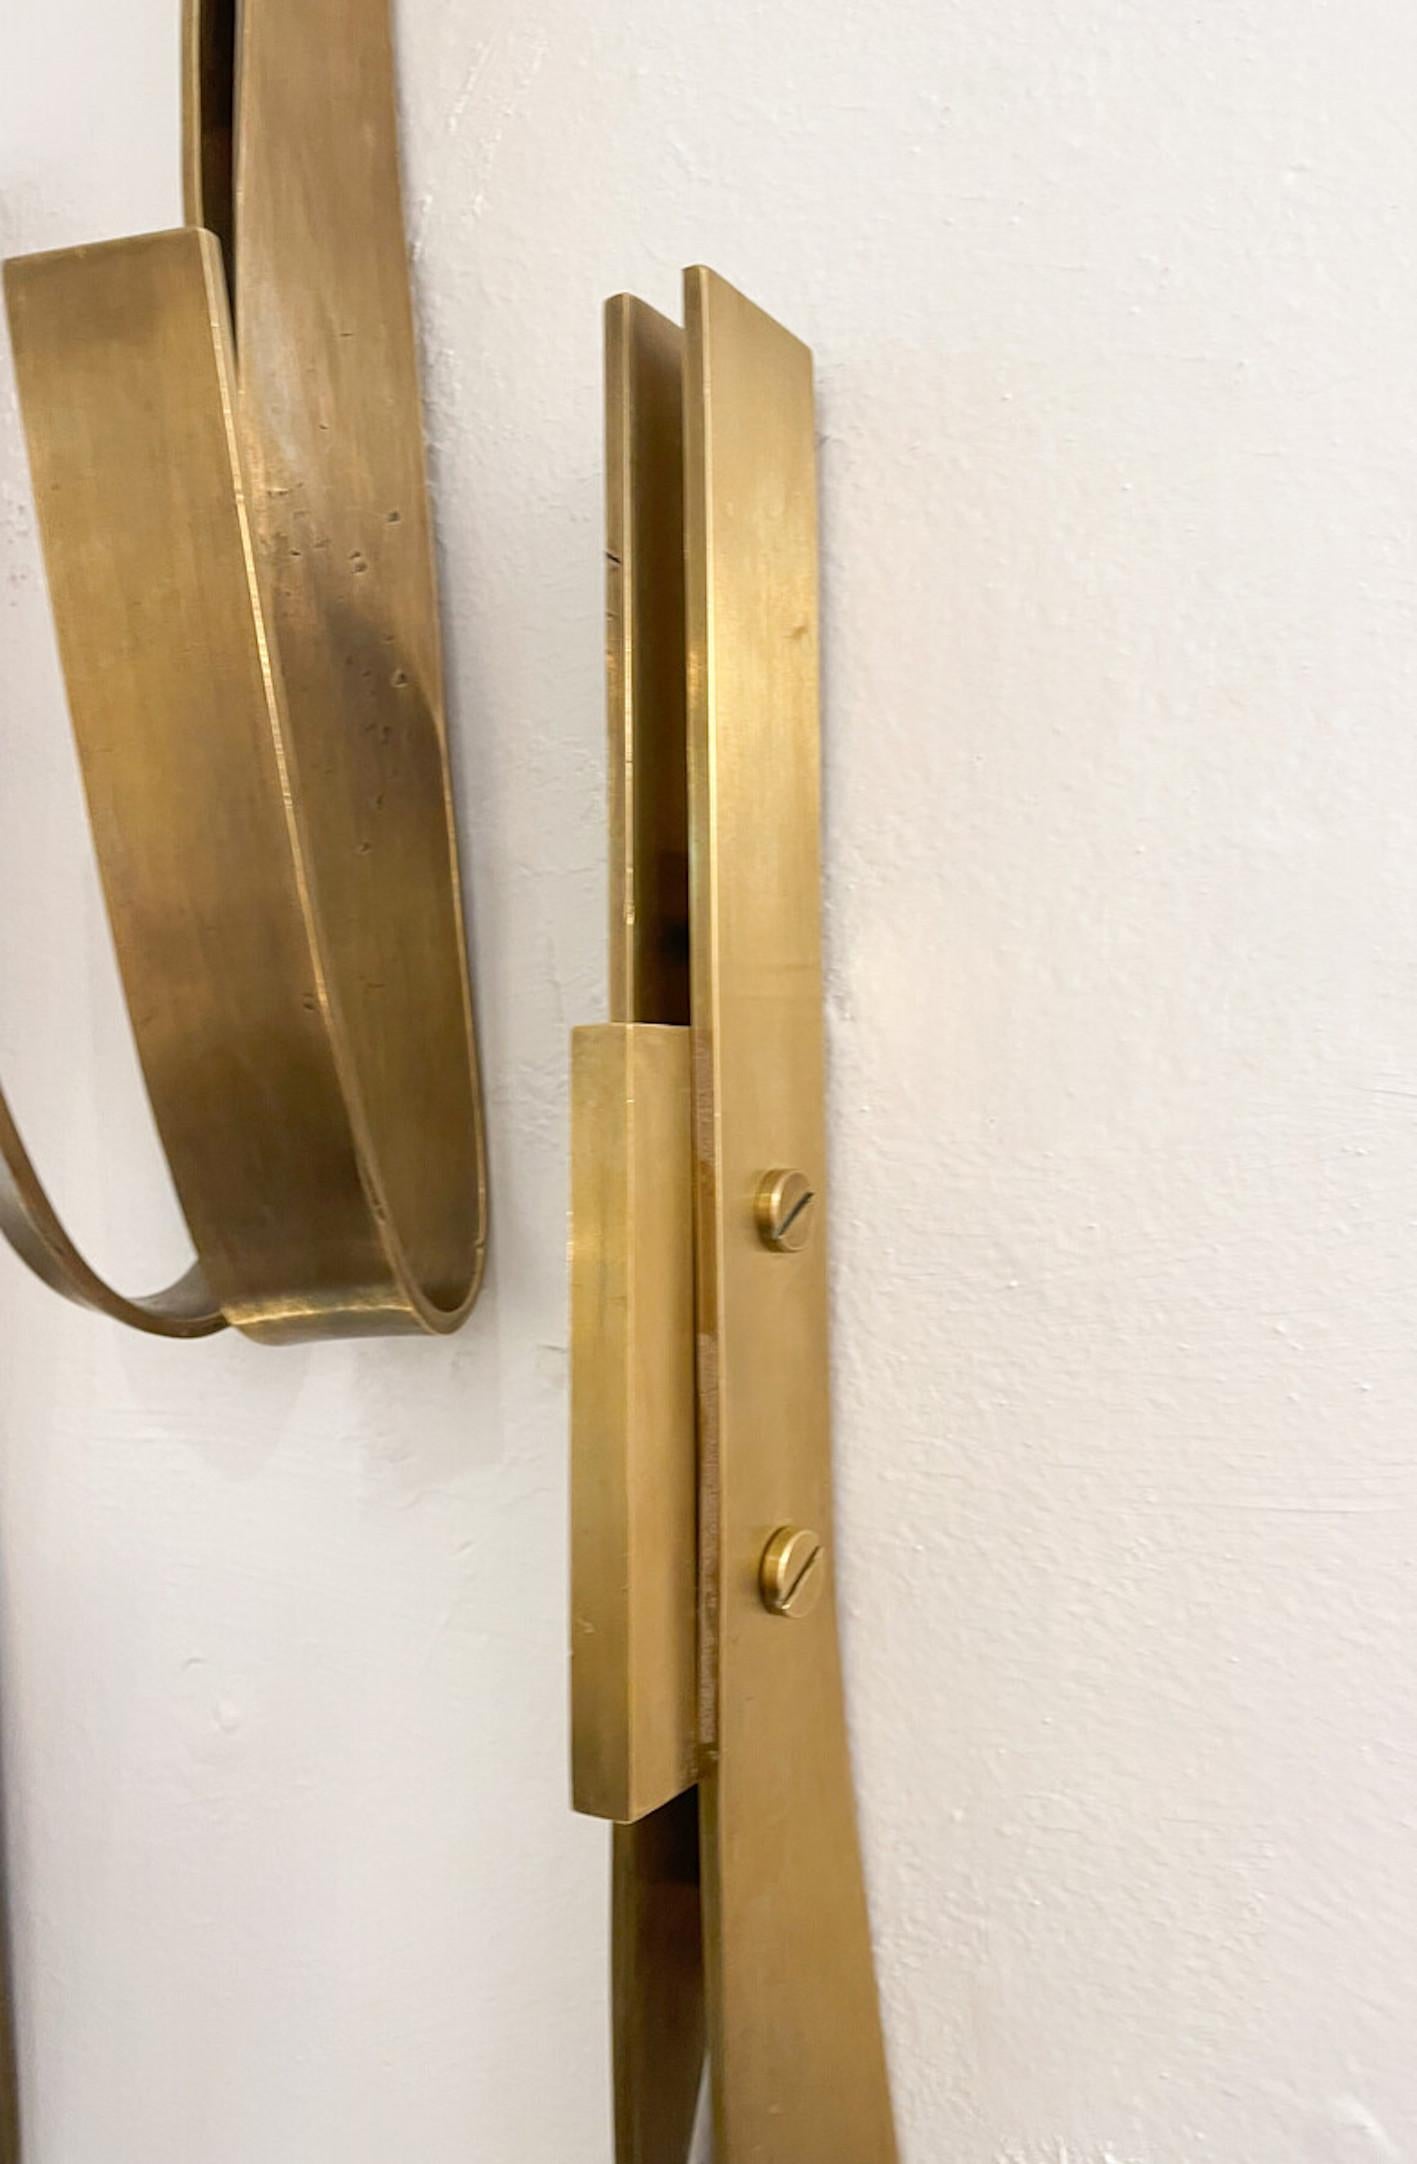 Brass Mid-Century Coat Rack, Italy, 1960s - 6 available For Sale